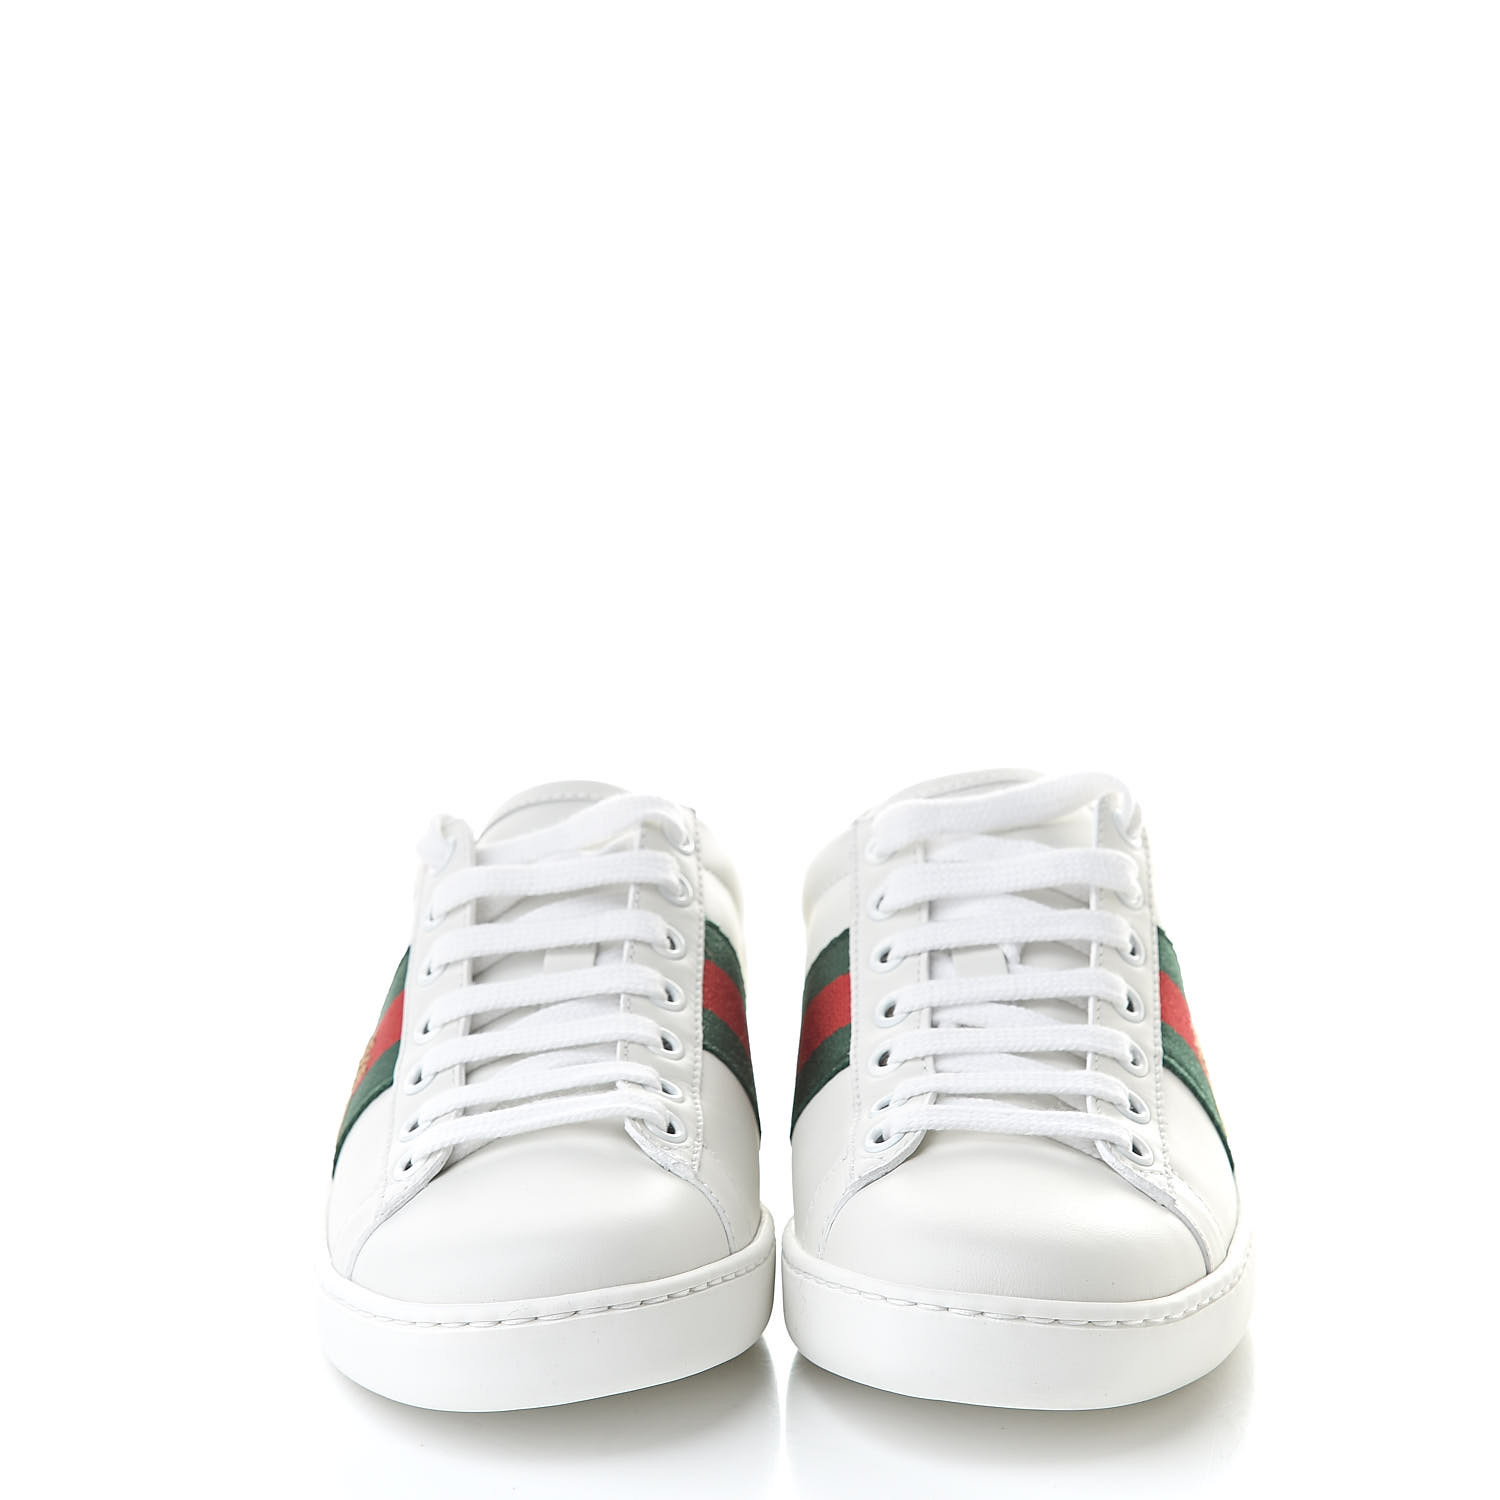 GUCCI Calfskin Embroidered Womens Ace Bee Sneakers 35 White Green 513020